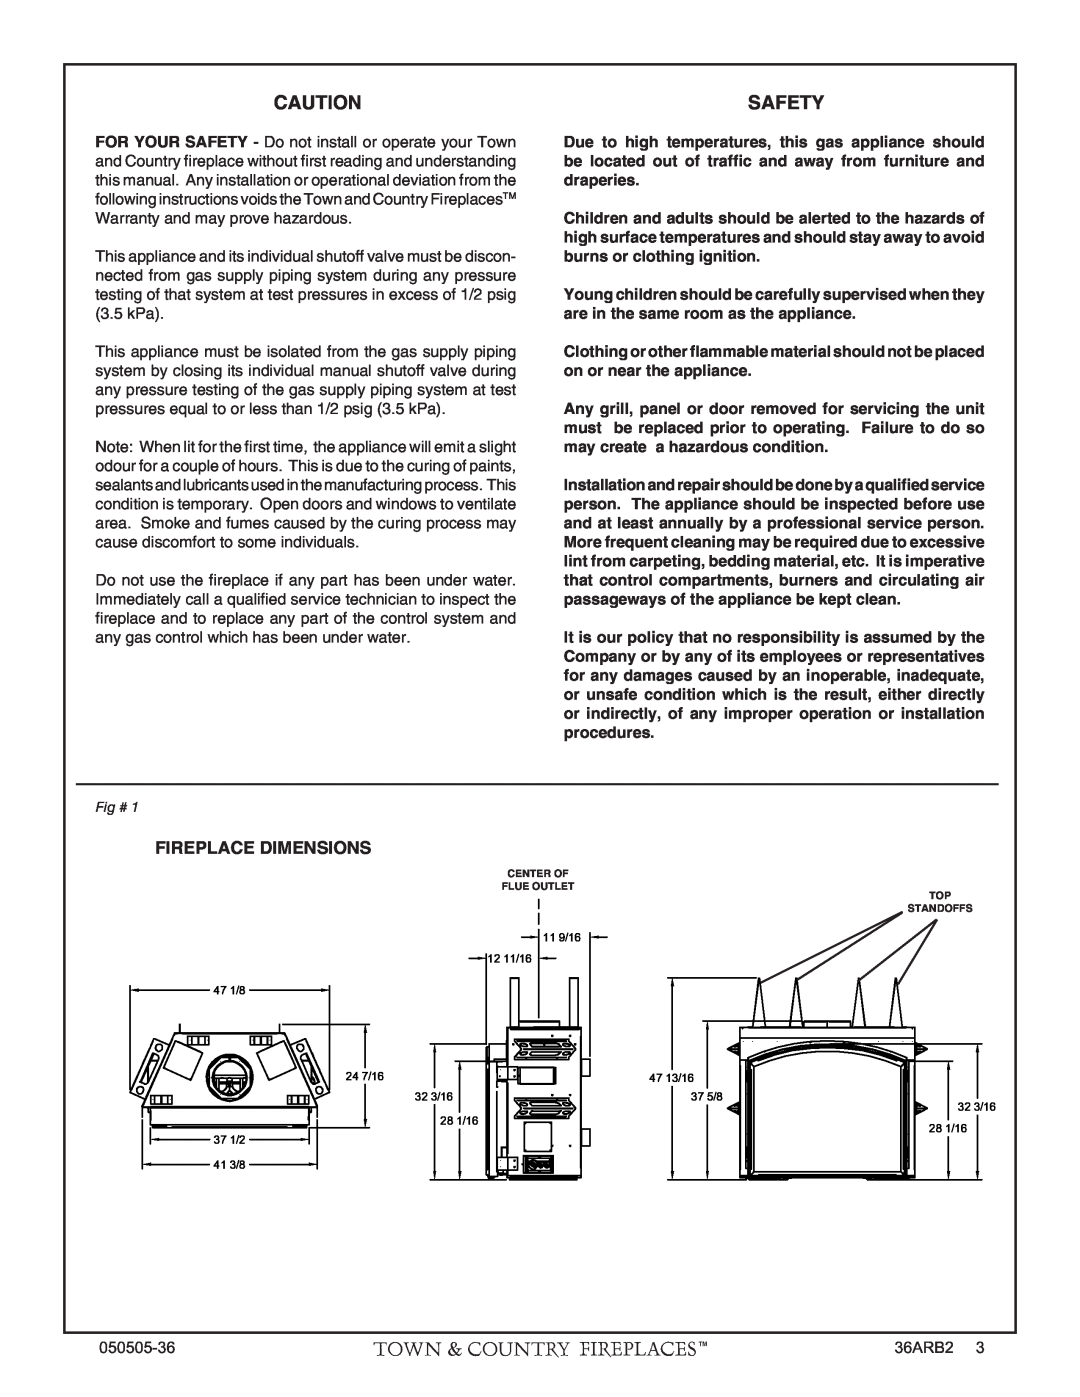 PGS TC36 AR manual Safety, Fireplace Dimensions 